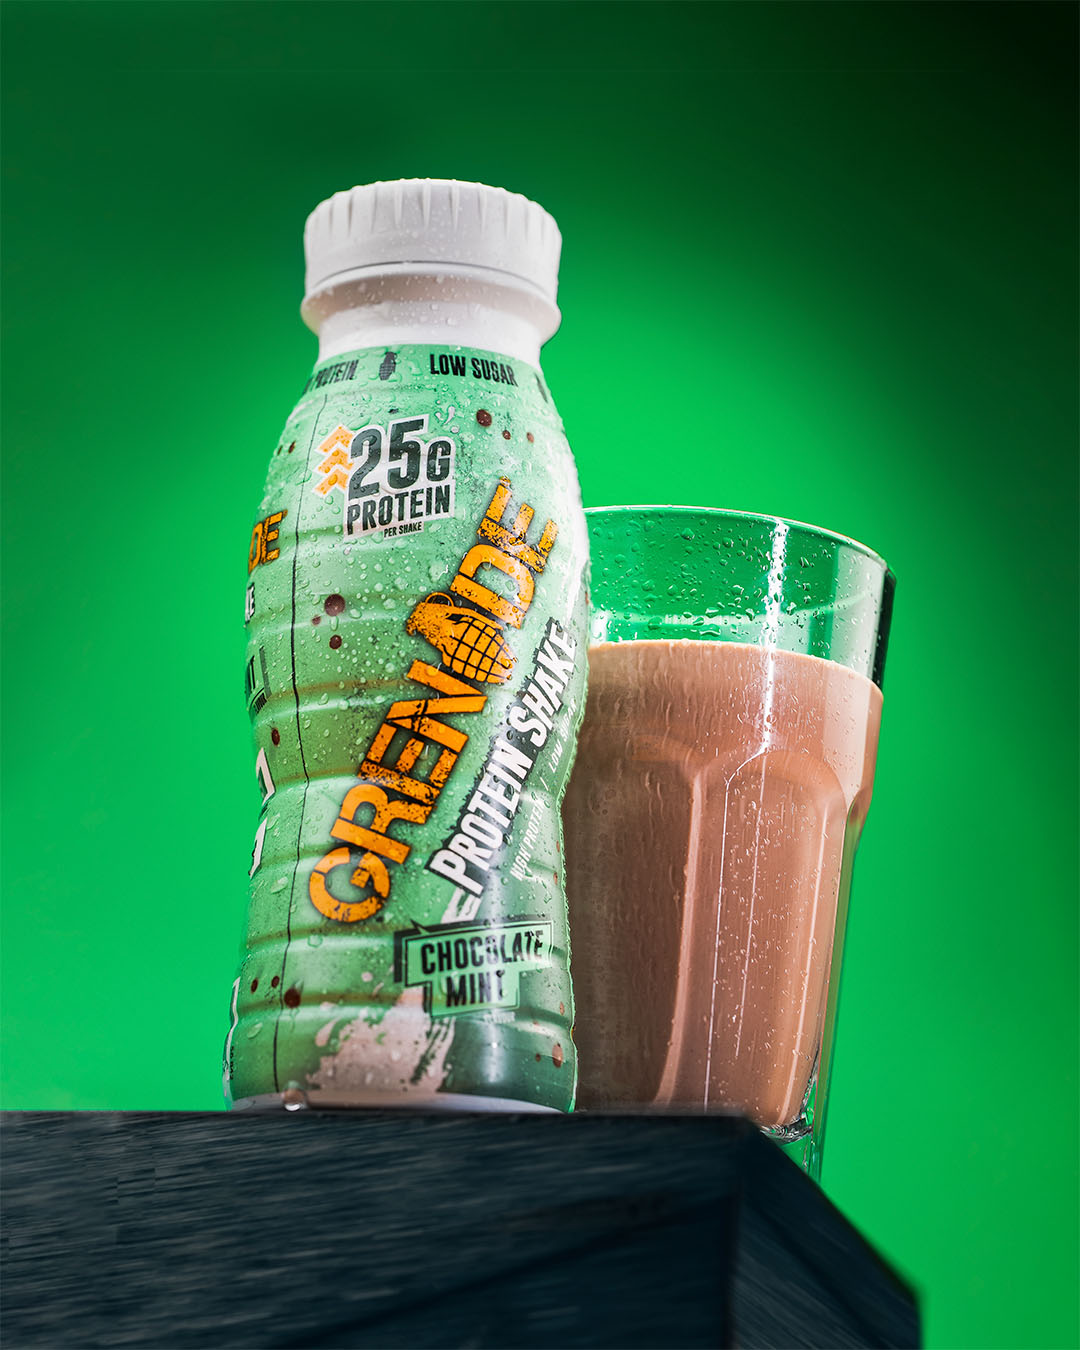 Grenade Mint Chocolate Protein Shake in a glass next to bottle